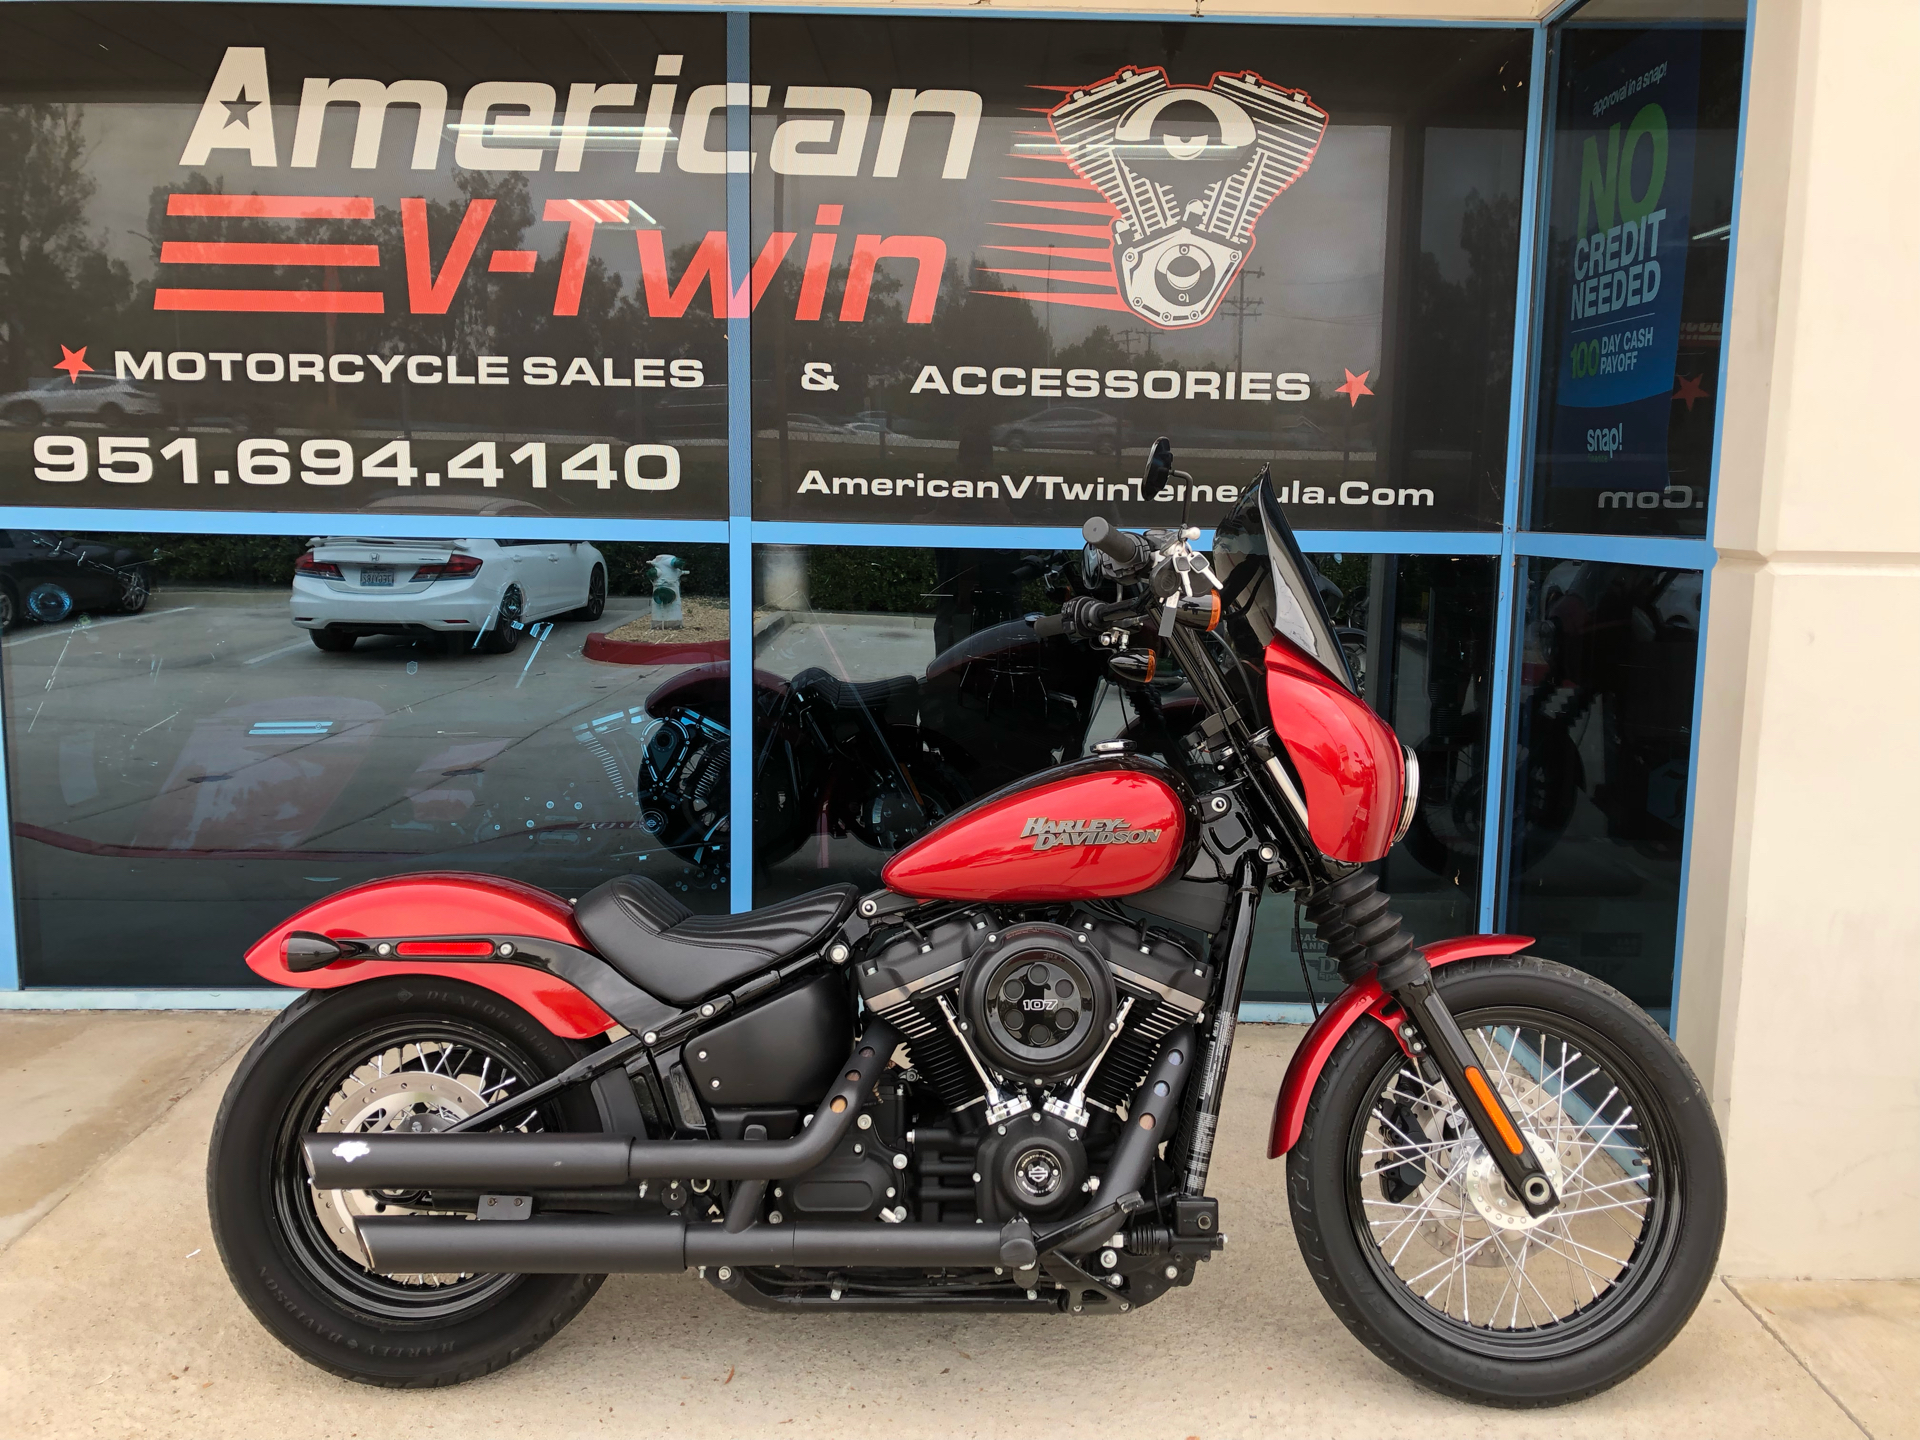 Used 2018 Harley Davidson Street Bob 107 Wicked Red Twisted Cherry Motorcycles In Temecula Ca Har022855